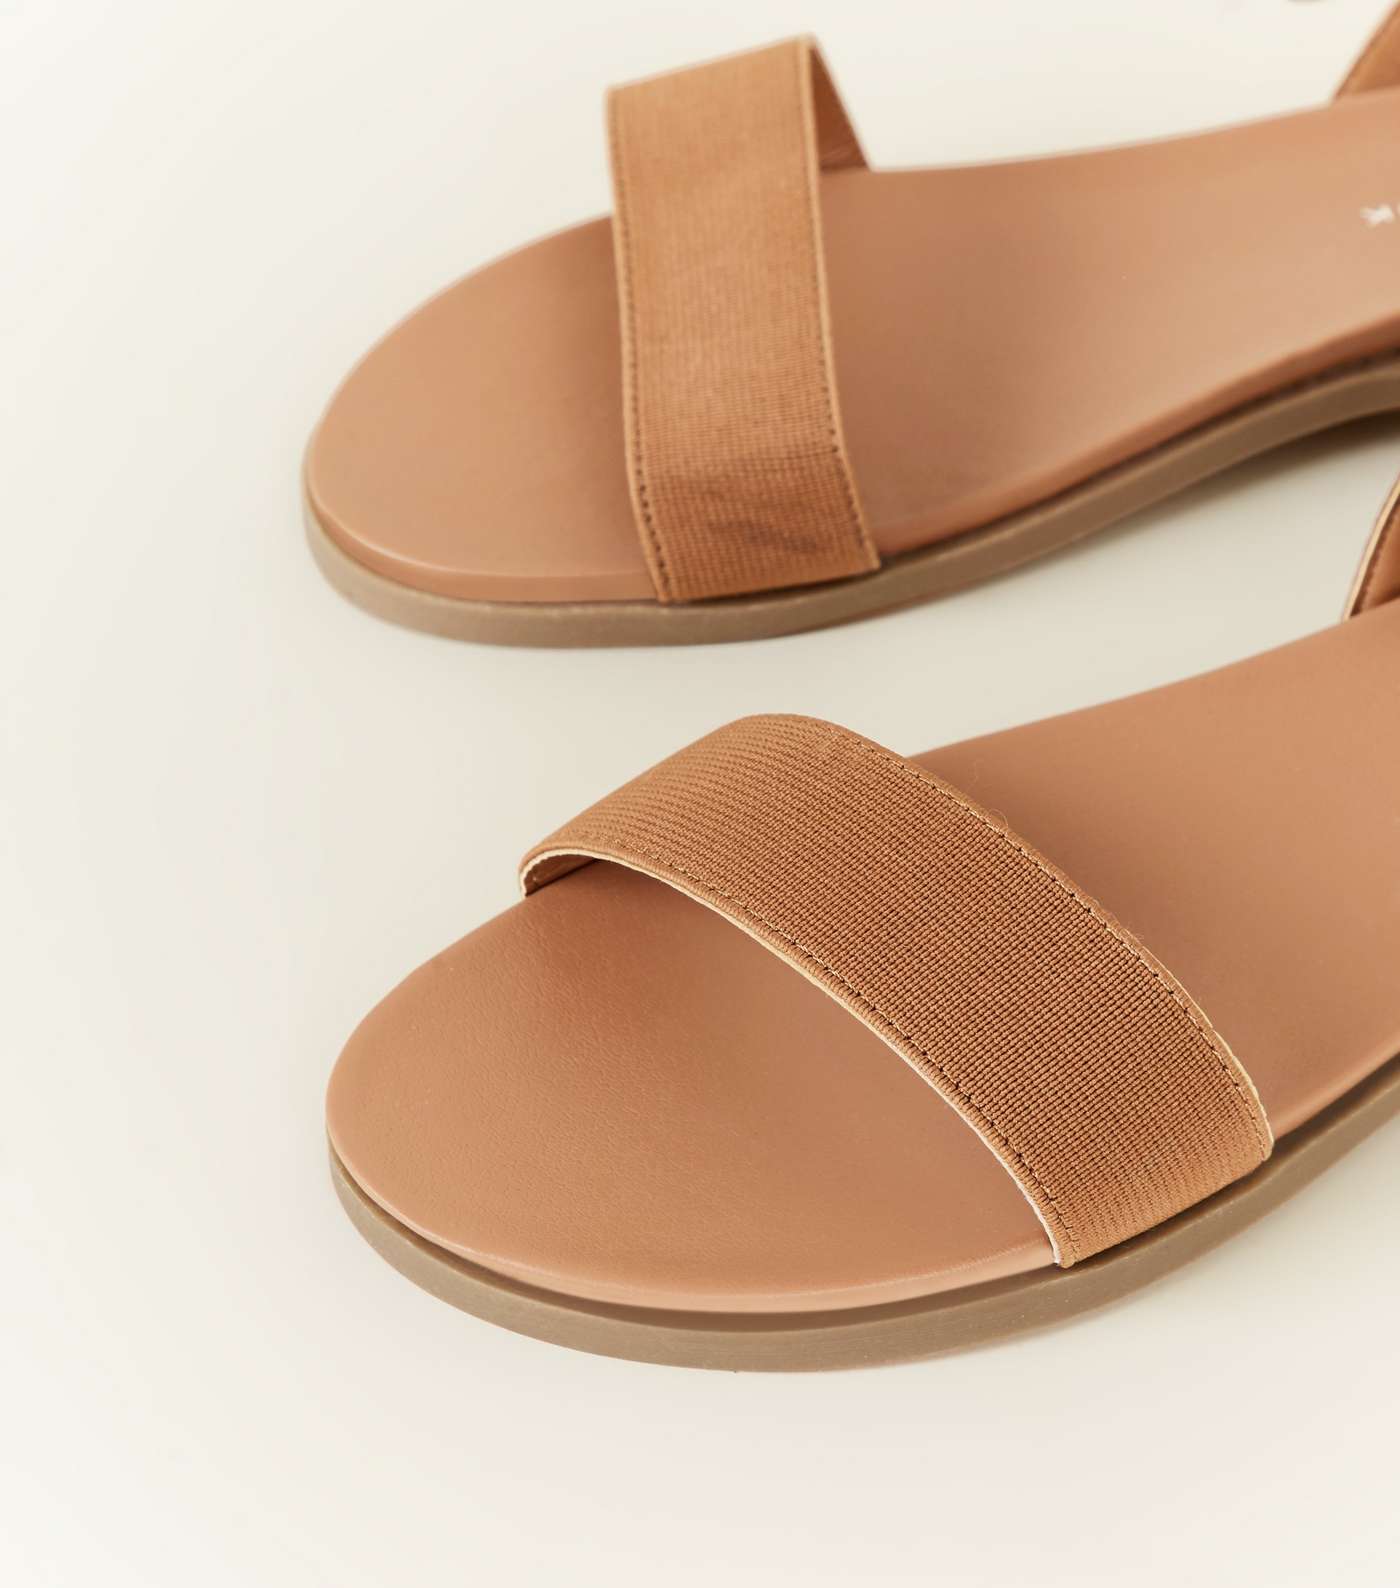 Wide Fit Tan Elasticated Ankle Cuff Sandals Image 4